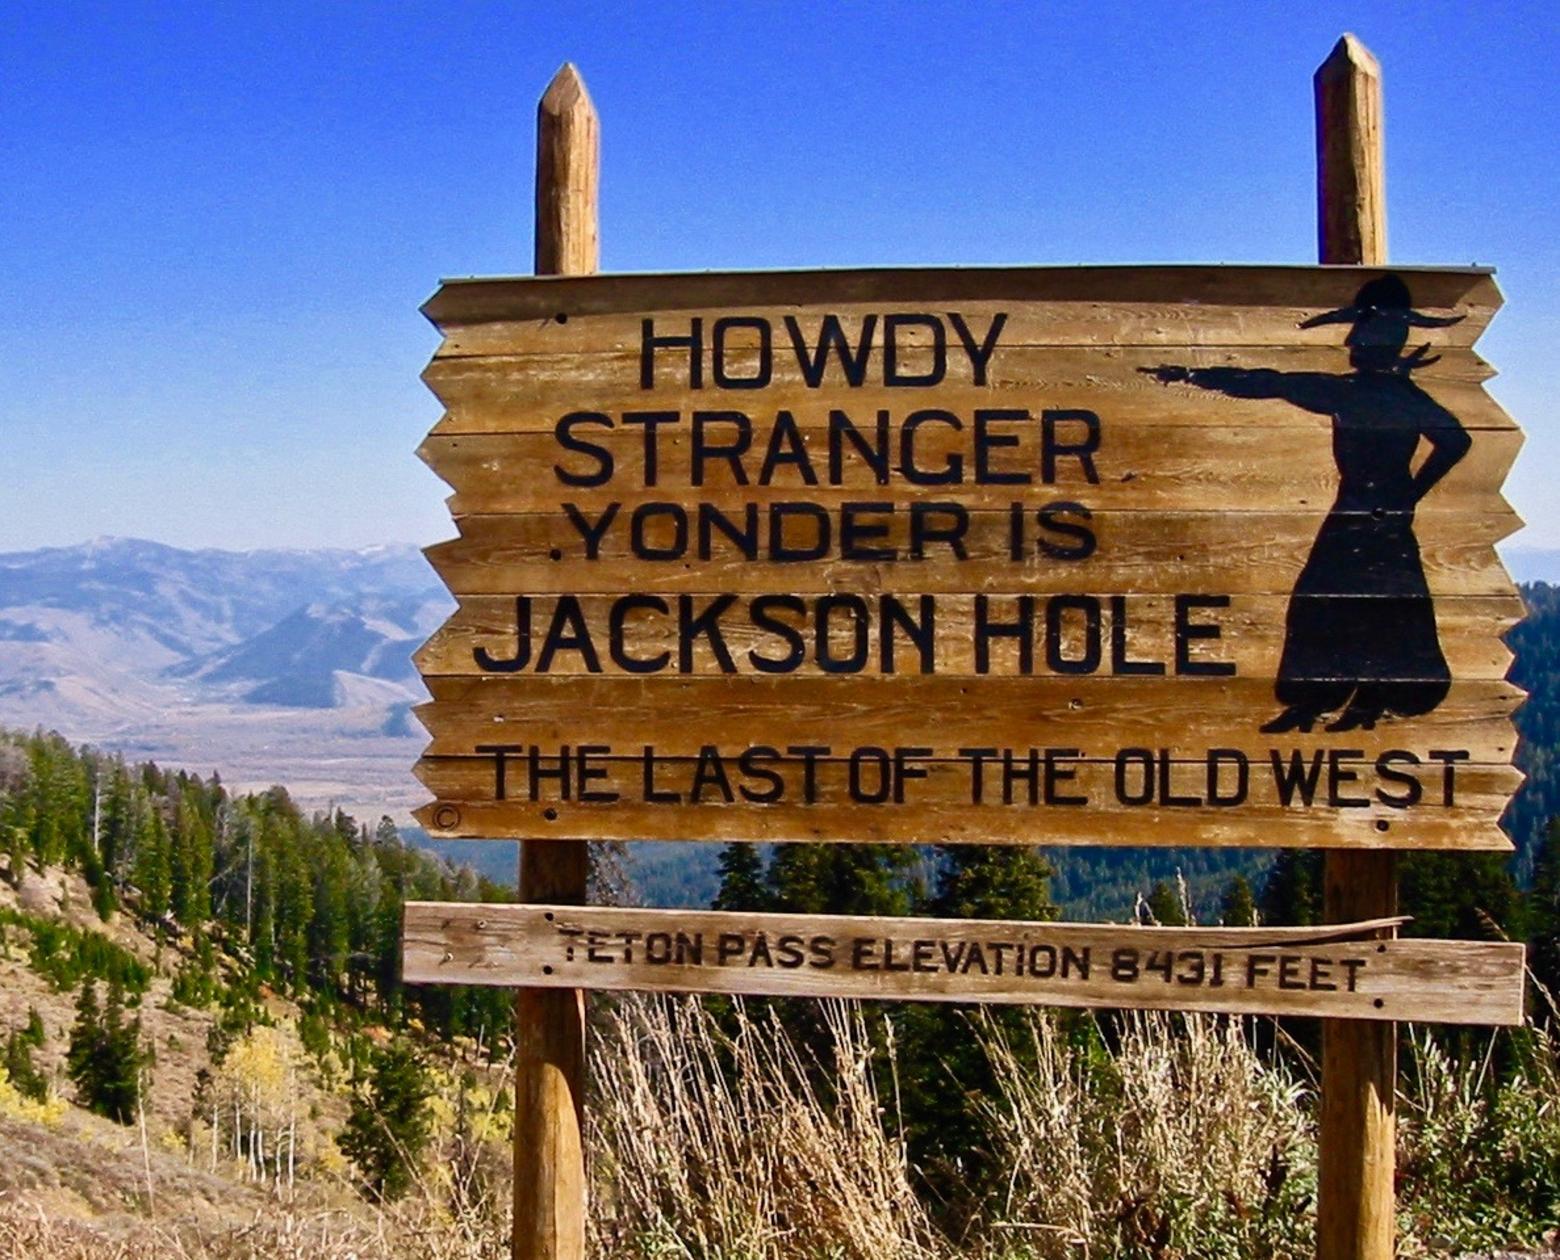 Jackson Hole exudes a quaint "Old West" charm but behind the tourism image lies the richest county per capita in all of America.  Yes, right in the heart of the wildest ecosystem in the Lower 48 states is a place where statistical per person income is highest in the land. How does that concentration of wealth manifest itself? And how can it better protect the priceless things in nature?